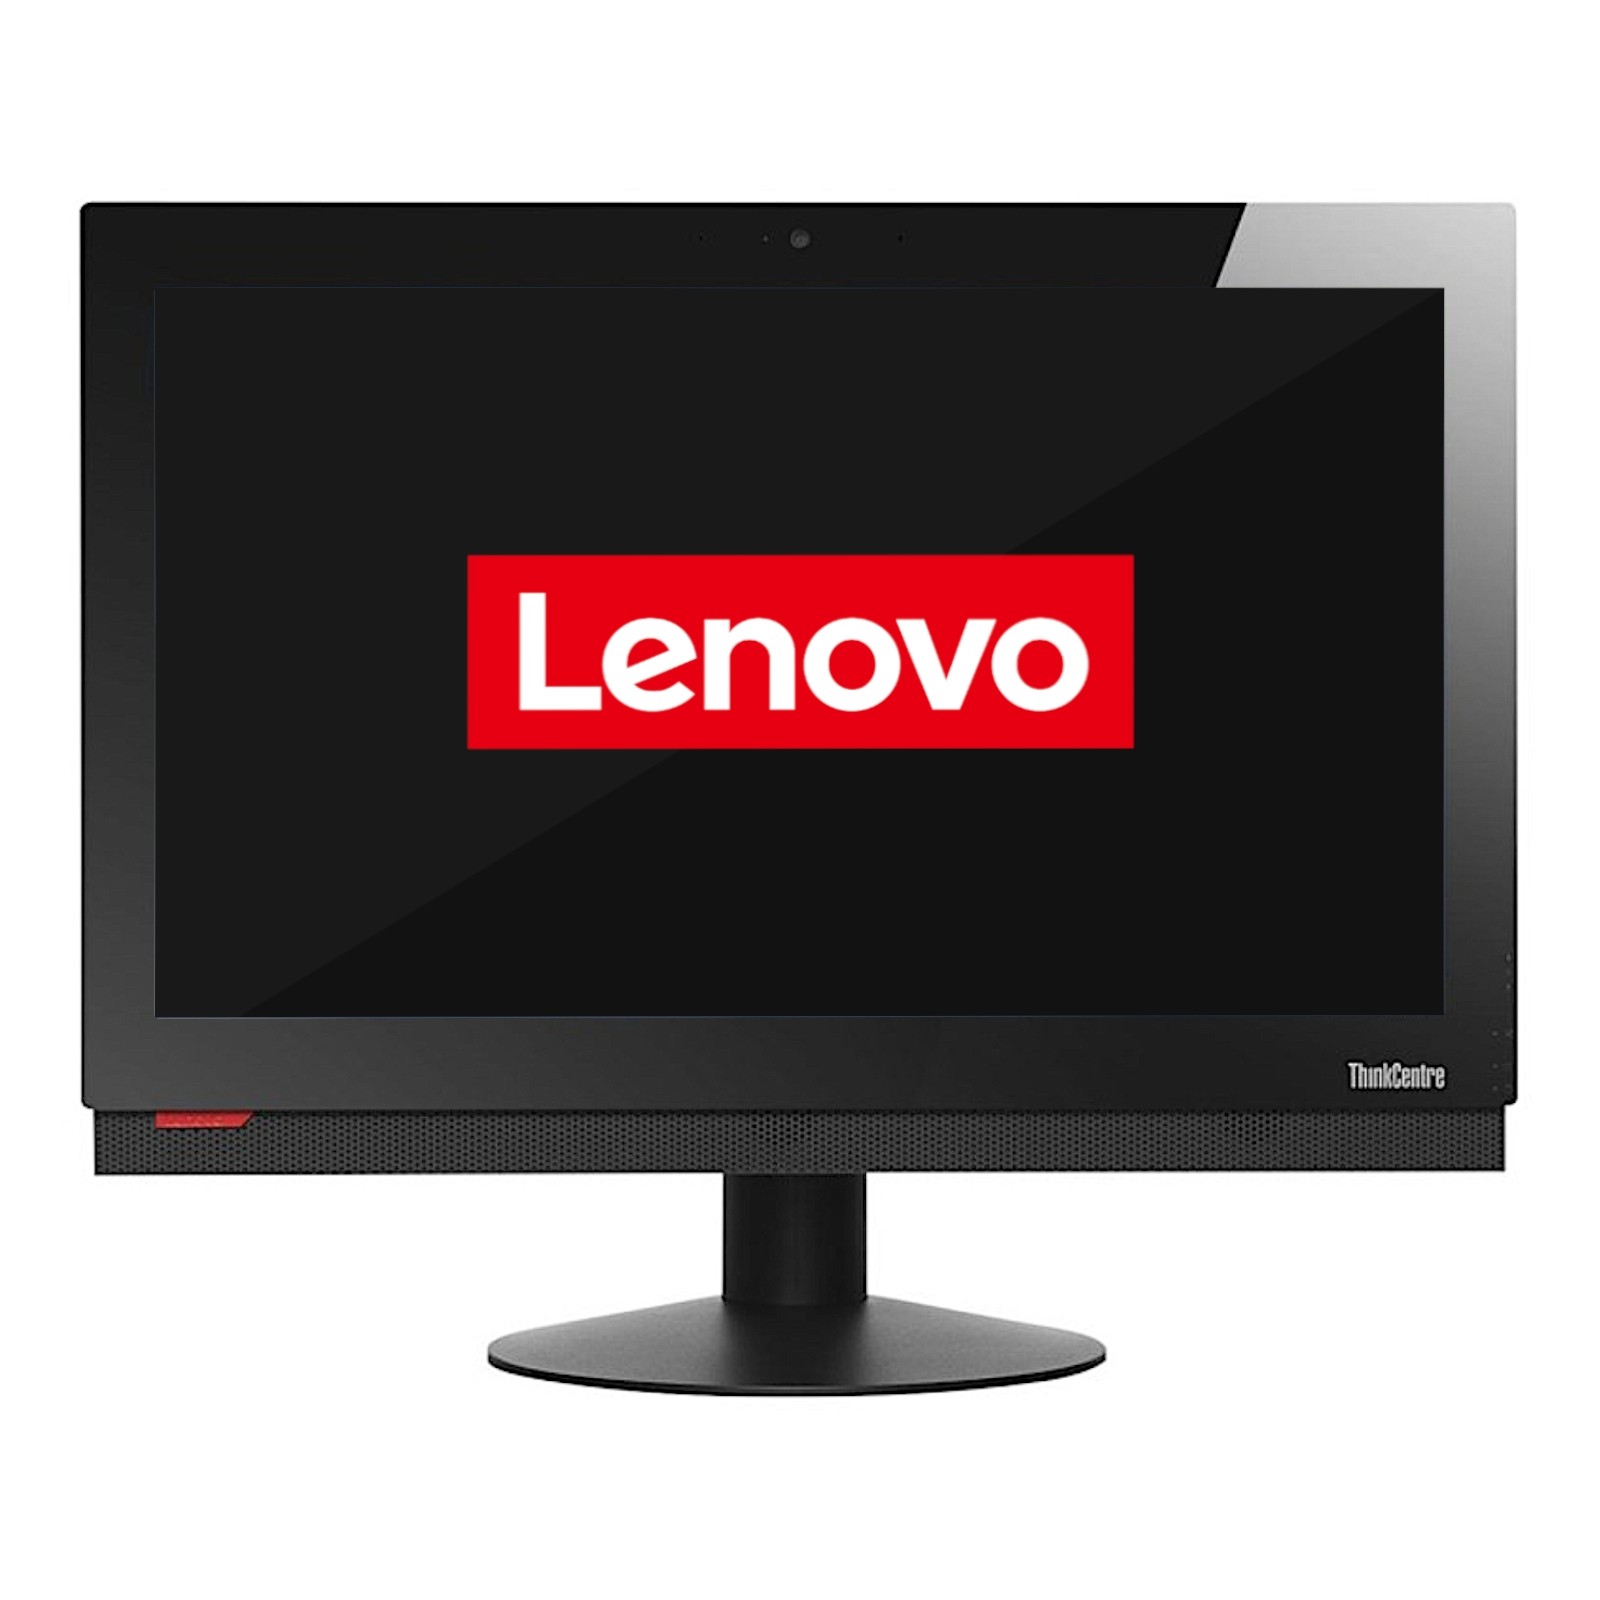 Lenovo ThinkCentre M810z 21.5" All-in-One (AiO) Desktop PC Front